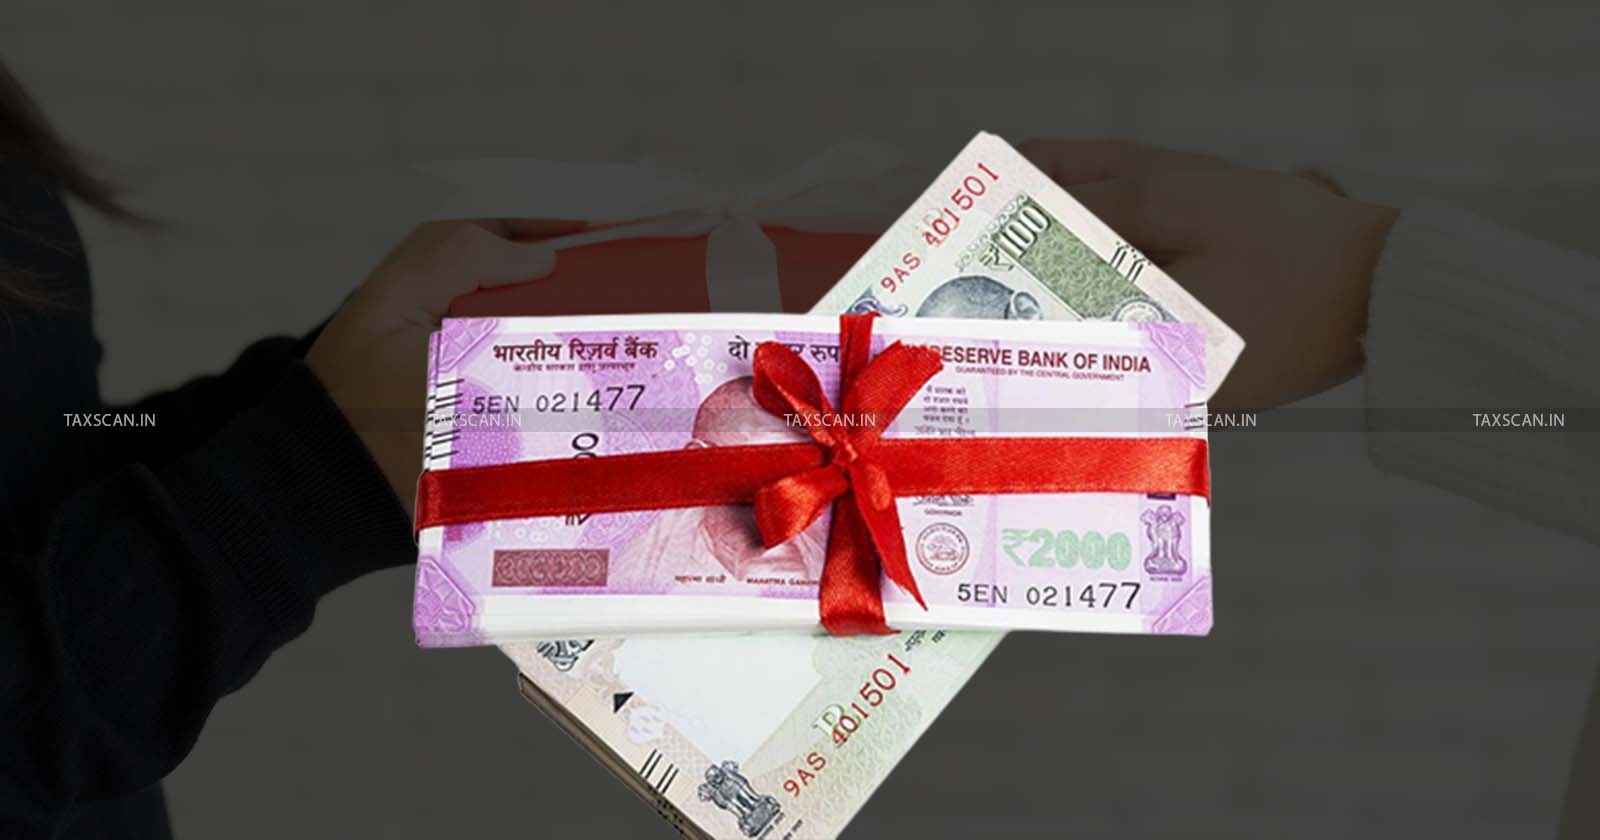 Cash Gift from Close Relatives - Close Relatives - Cash Gift - Cash Gift from Close Relatives during Emergency - ITAT - Income Tax - Income Tax Act - ITAT deletes Addition - Uncle and Aunt - taxscan